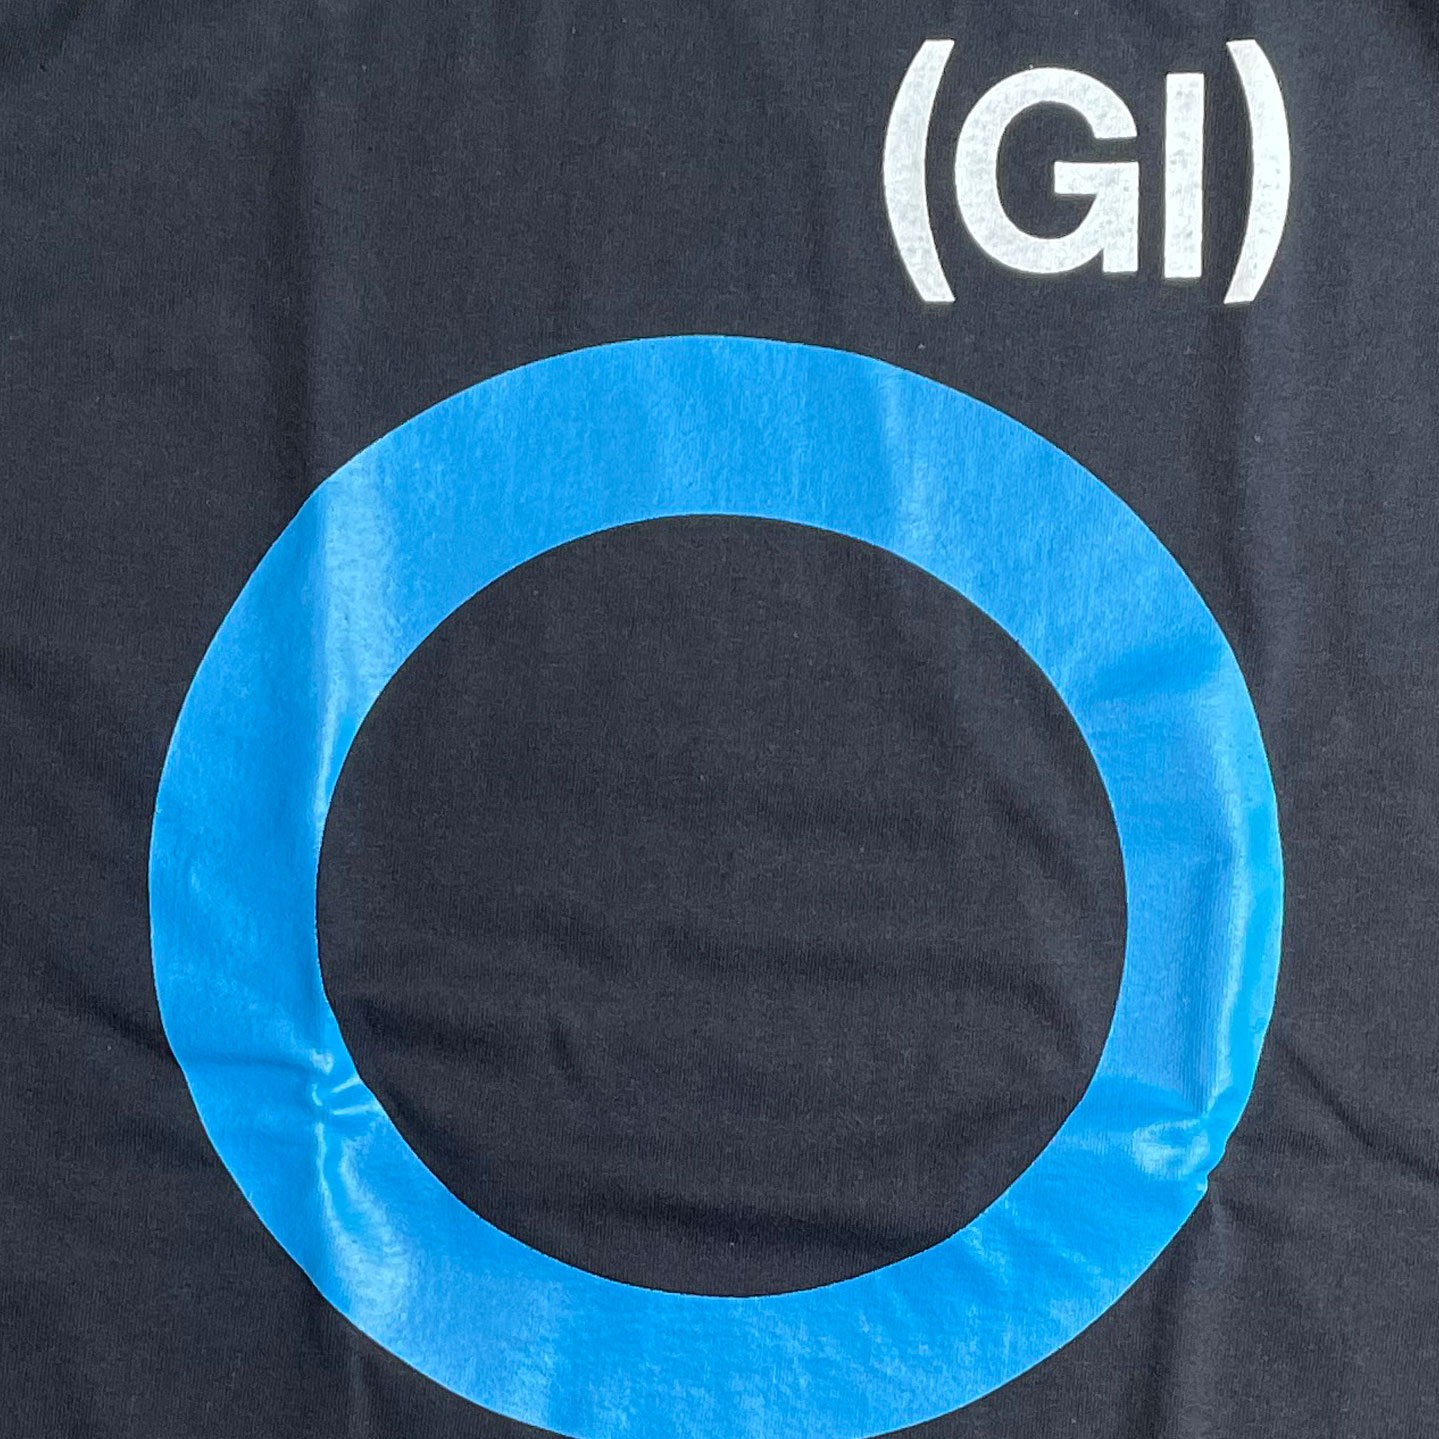 GERMS Tシャツ (GI）